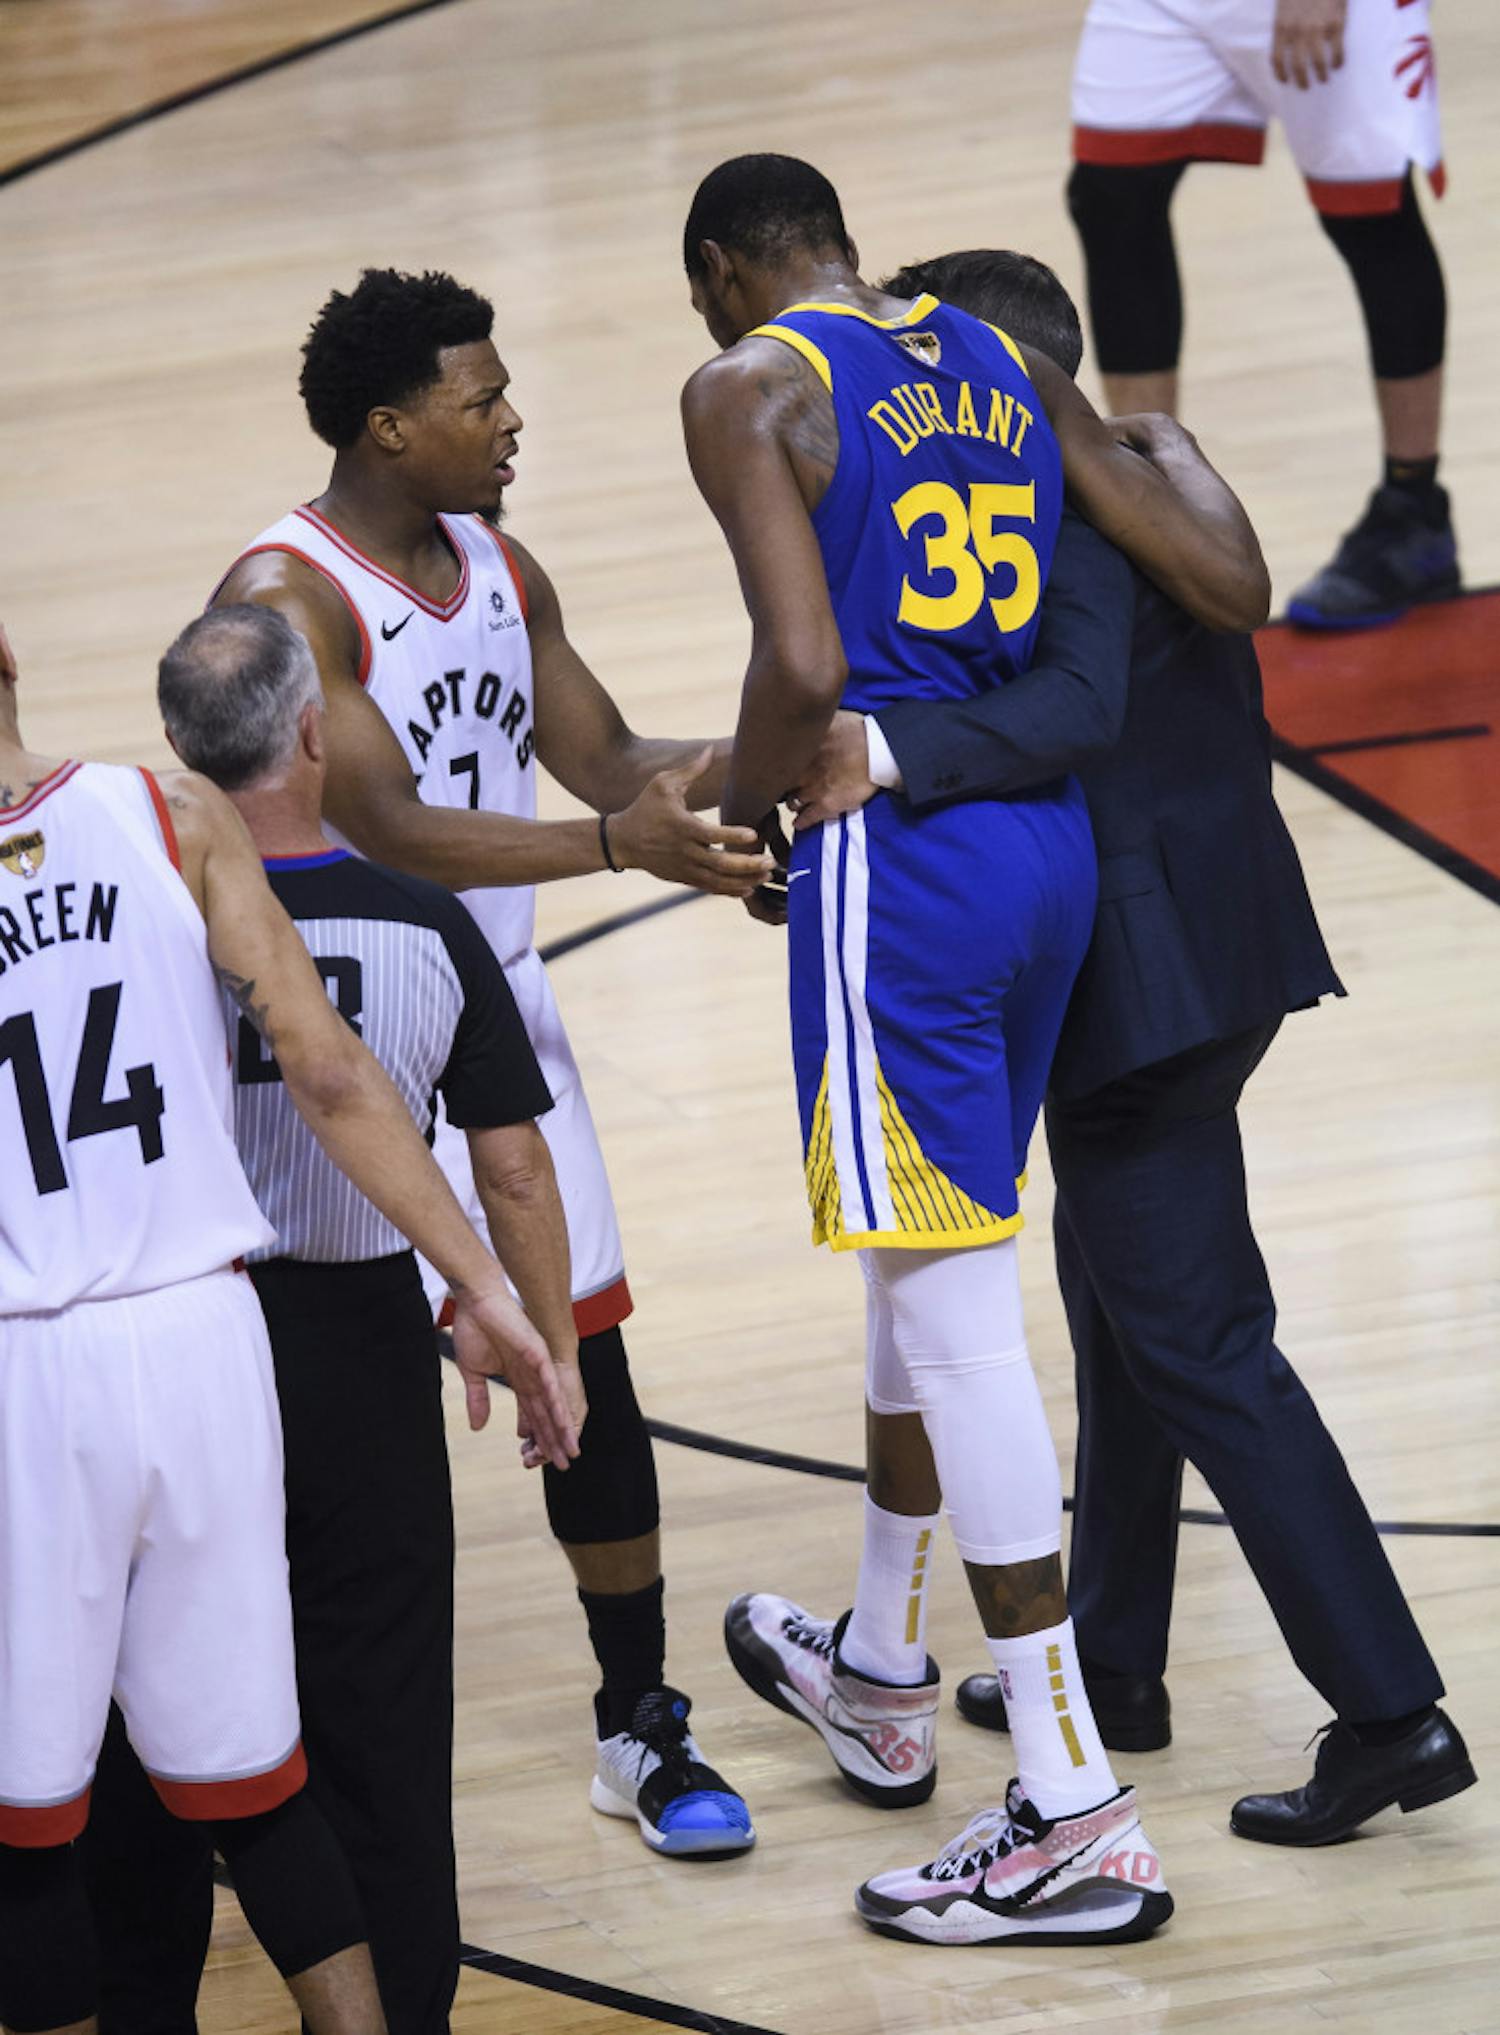 Warriors small forward Kevin Durant limps off the court after rupturing his Achilles in Game 5 of the NBA Finals on Monday night.